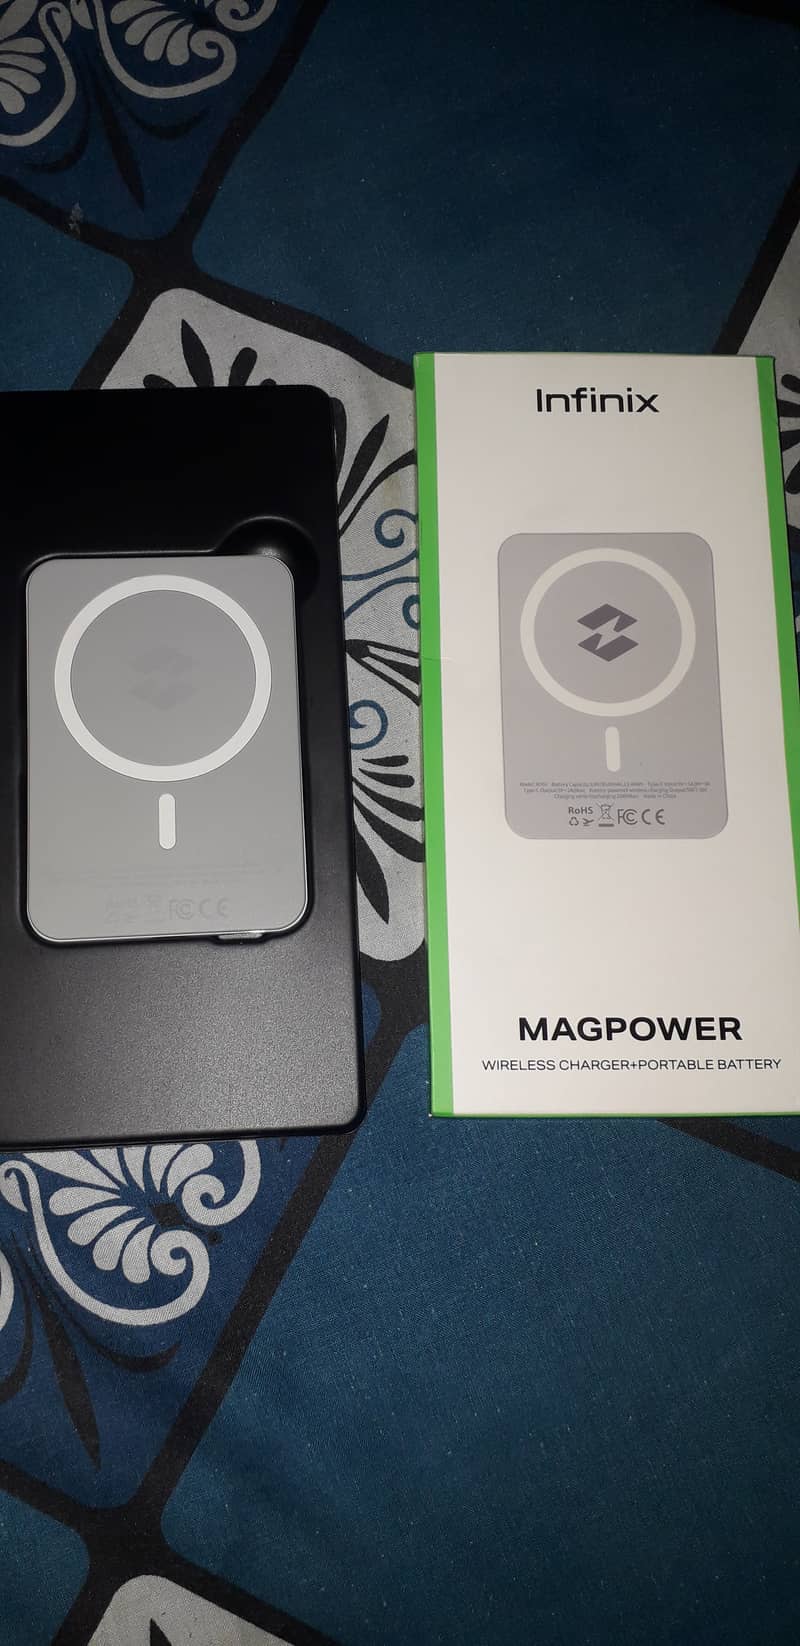 Infinix MAGPOWER Wireless charger 2